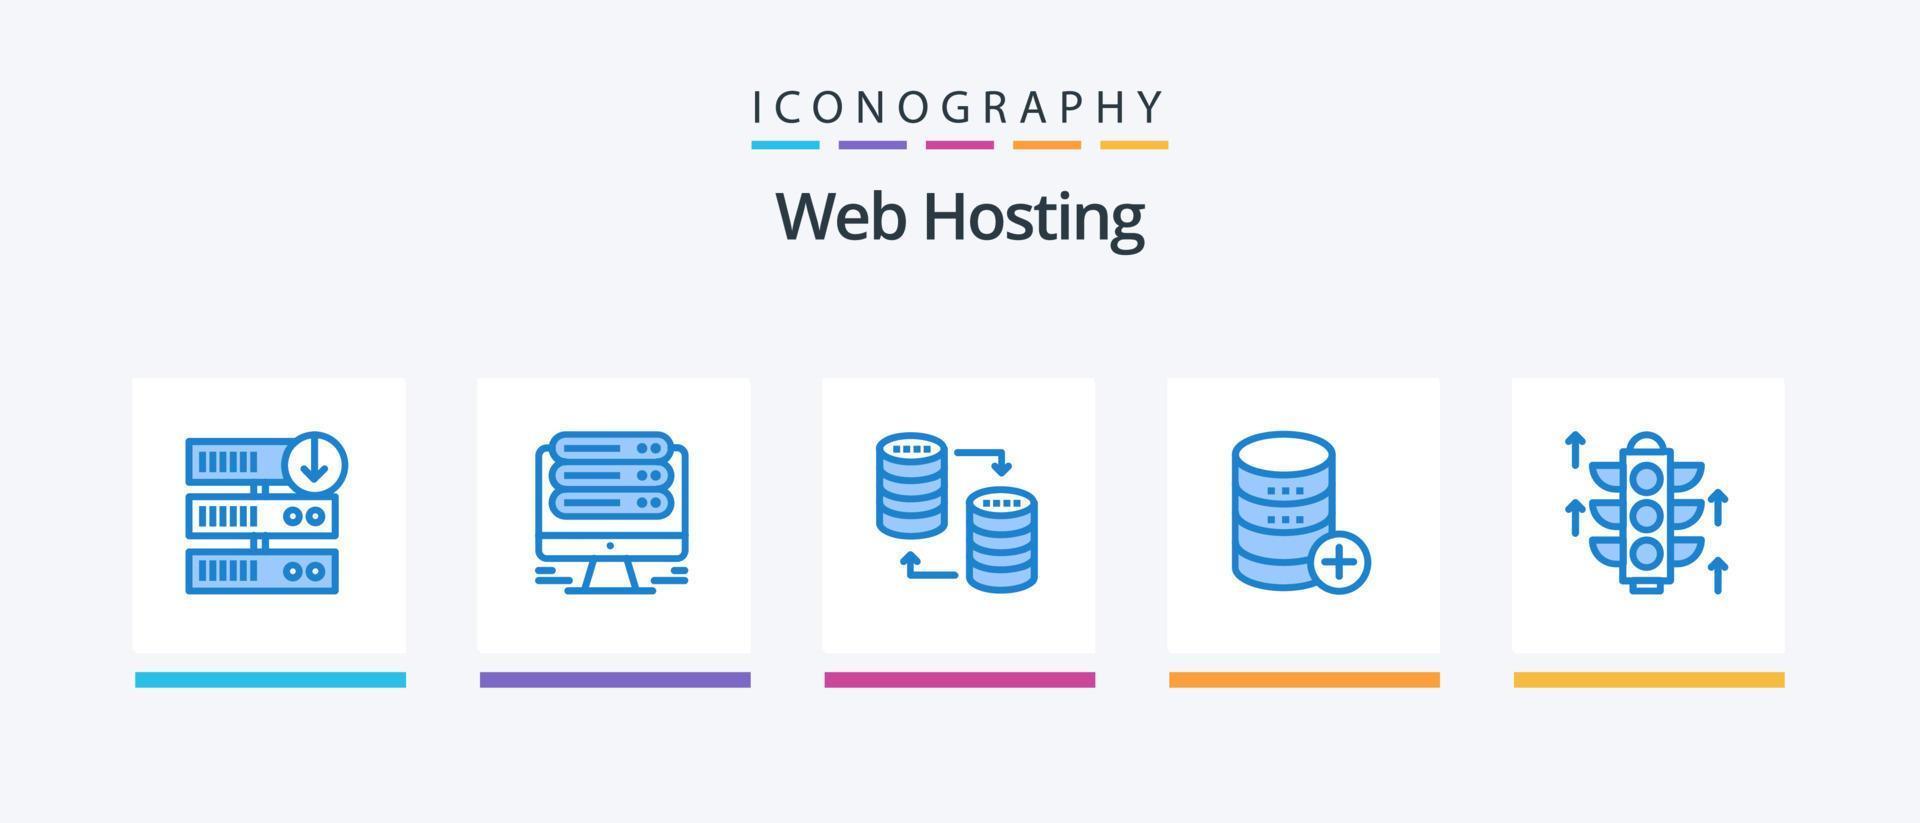 Web Hosting Blue 5 Icon Pack Including add. sal. database. server. share. Creative Icons Design vector